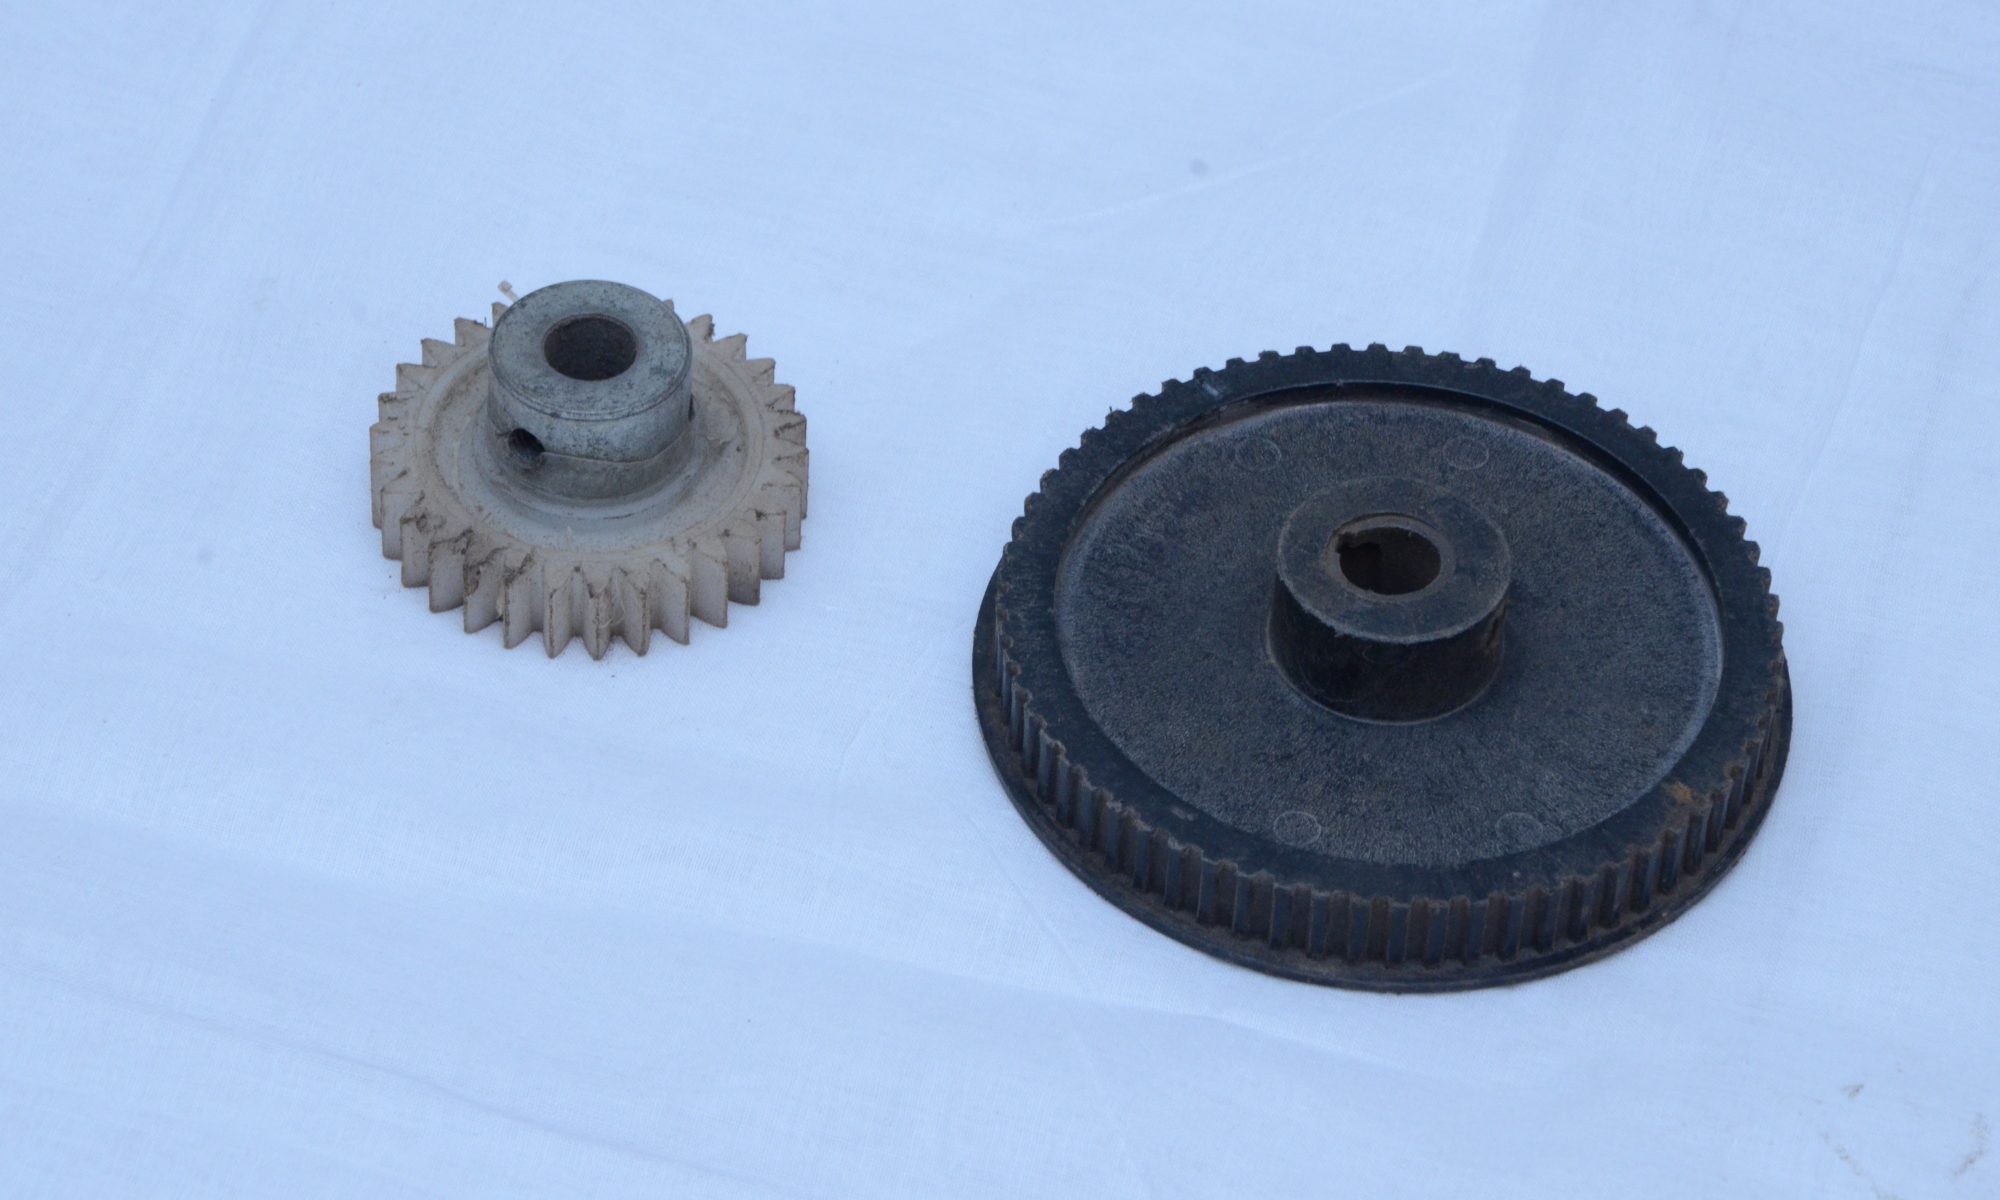 Gear for winder